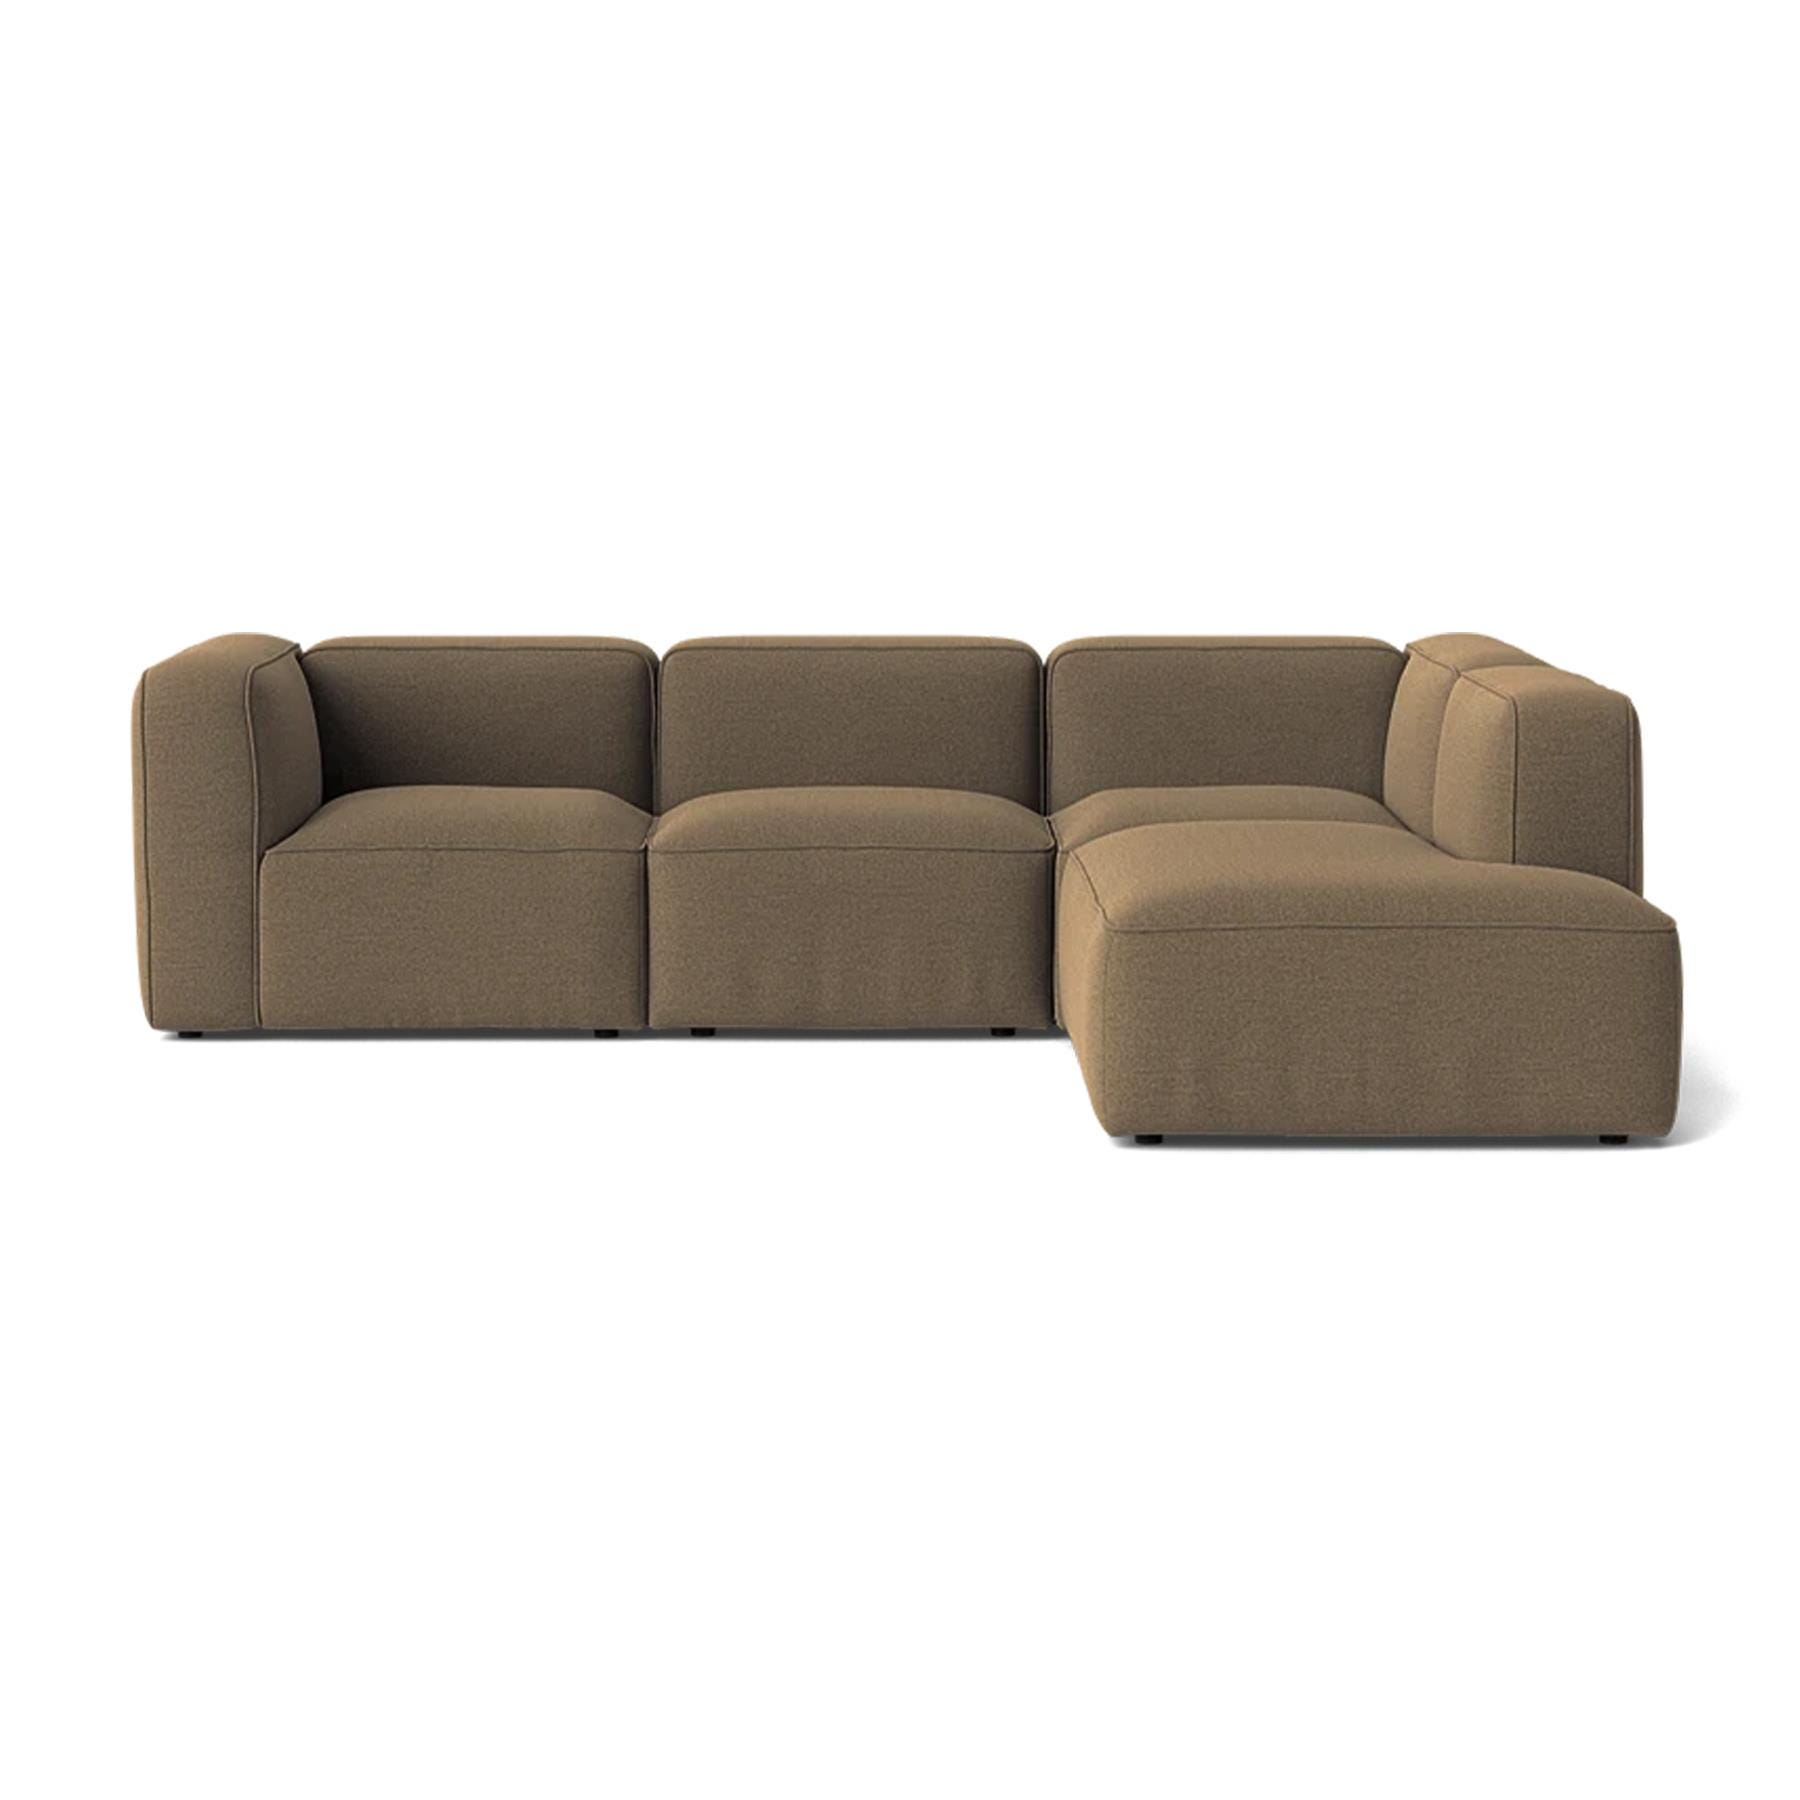 Make Nordic Basecamp Small Family Sofa Rewool 358 Right Brown Designer Furniture From Holloways Of Ludlow